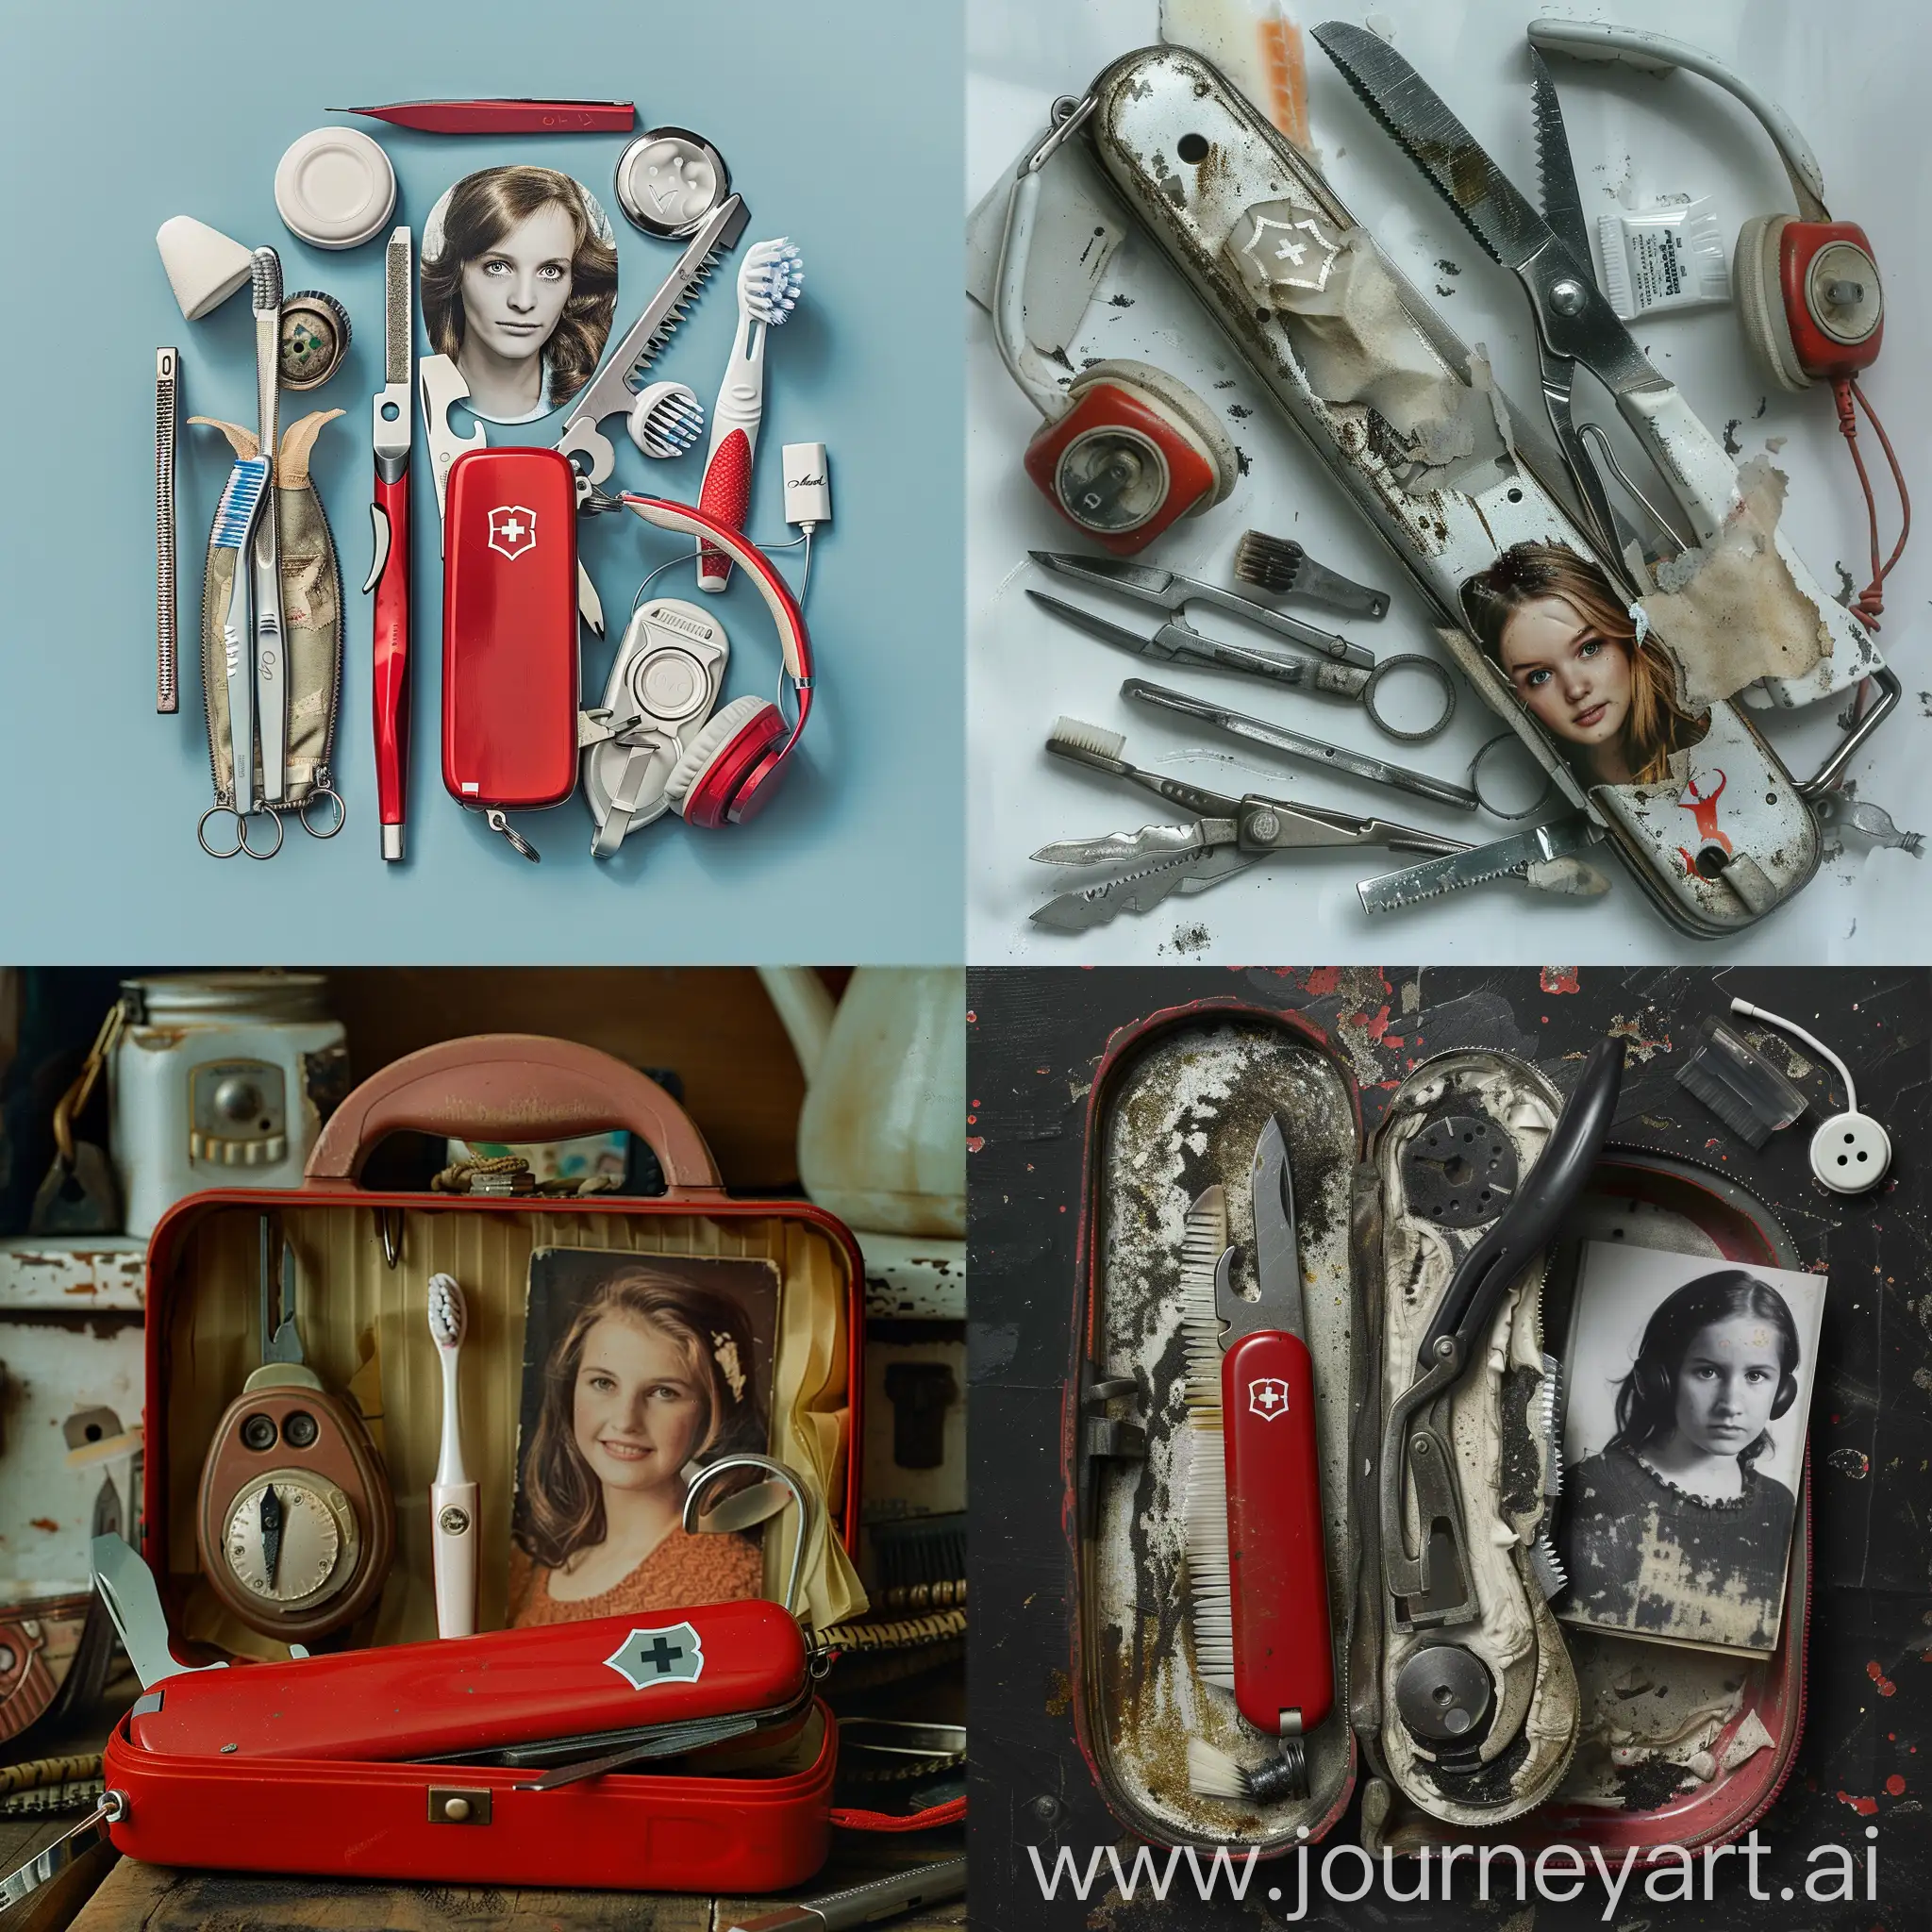 Innovative-Swiss-Army-Knife-with-Toothbrush-and-Vintage-Phone